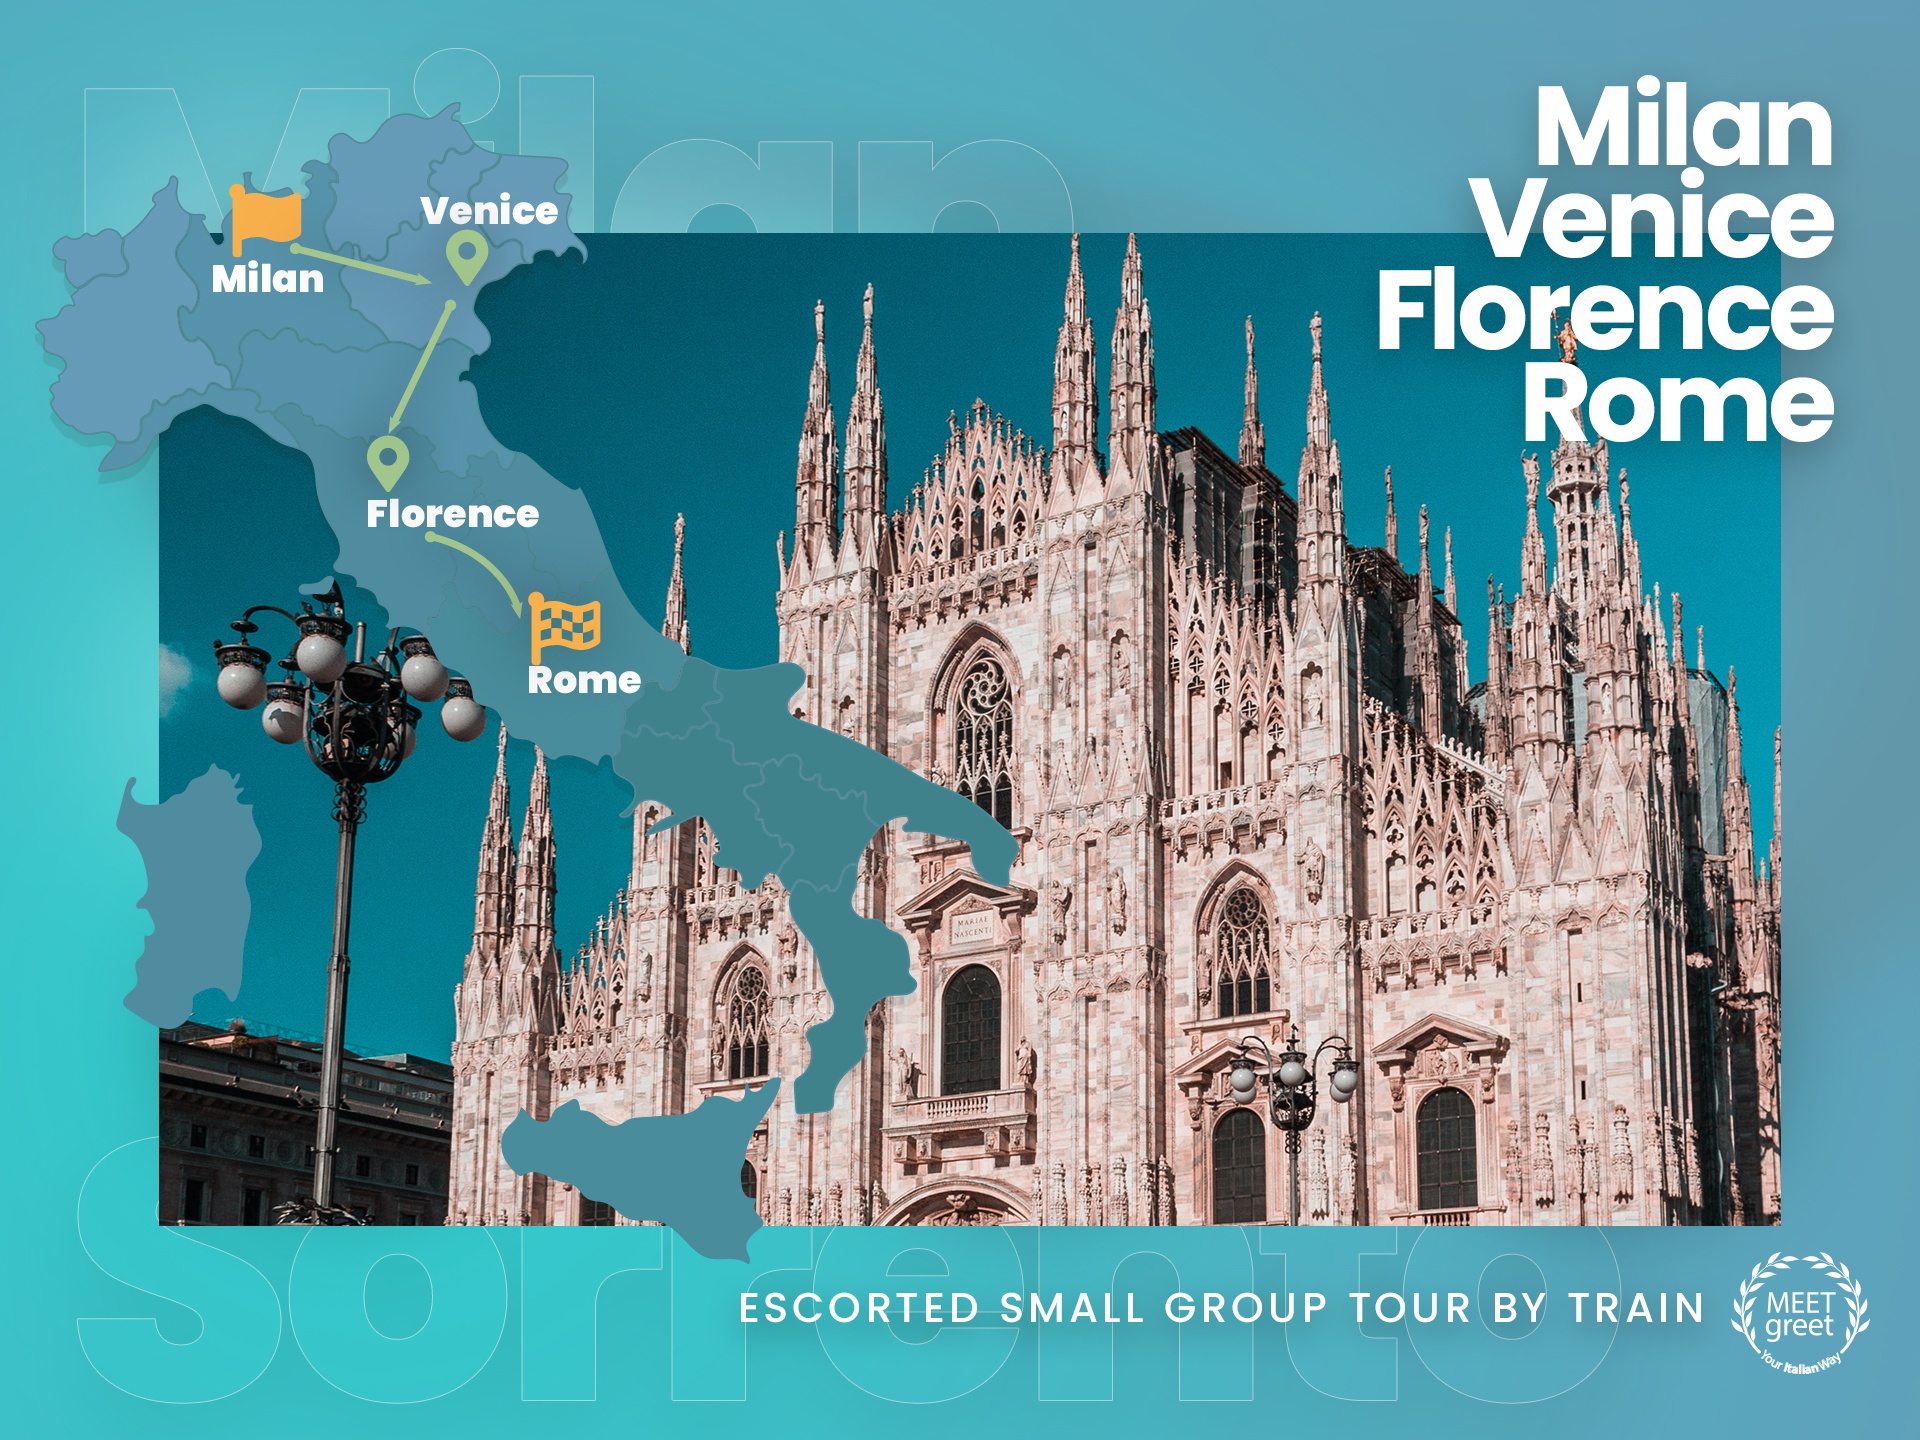 tourhub | Meet & Greet Italy | Milan, Venice, Florence, and Rome, escorted small group by train with luggage service included | Tour Map